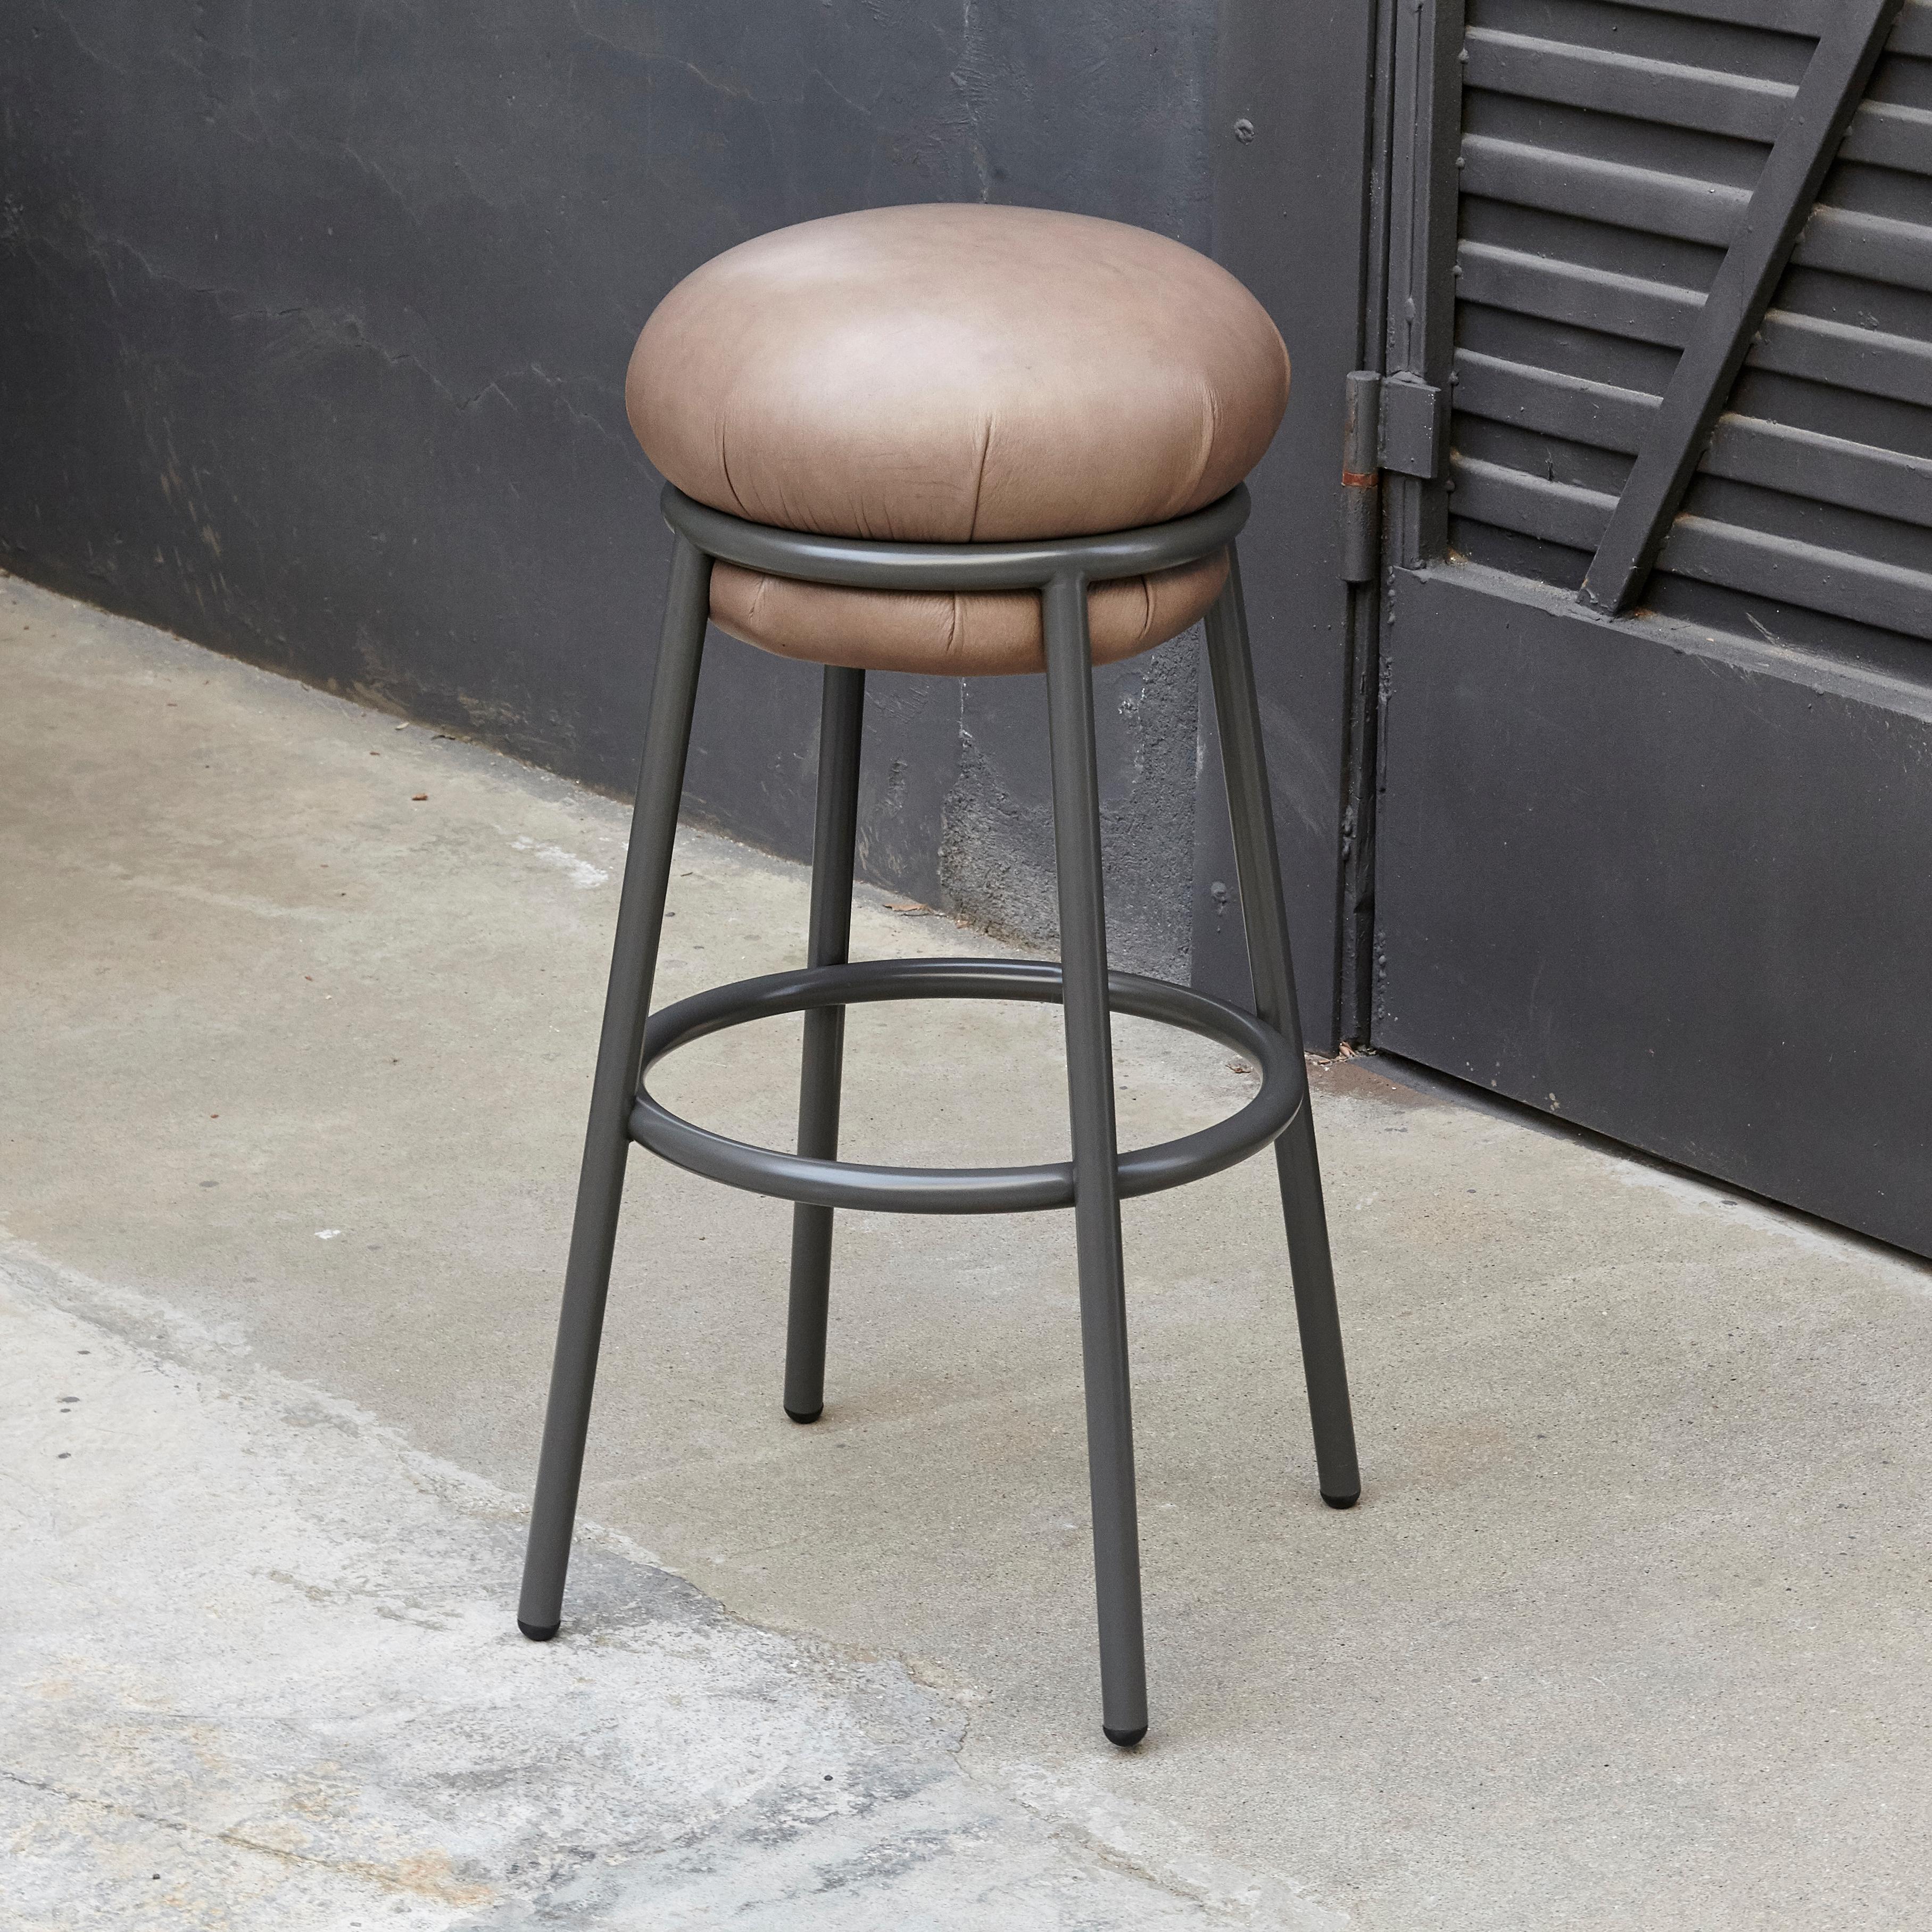 Spanish Grasso Contemporary Leather and Lacquered Metal Stool by Stephen Burks in Brown